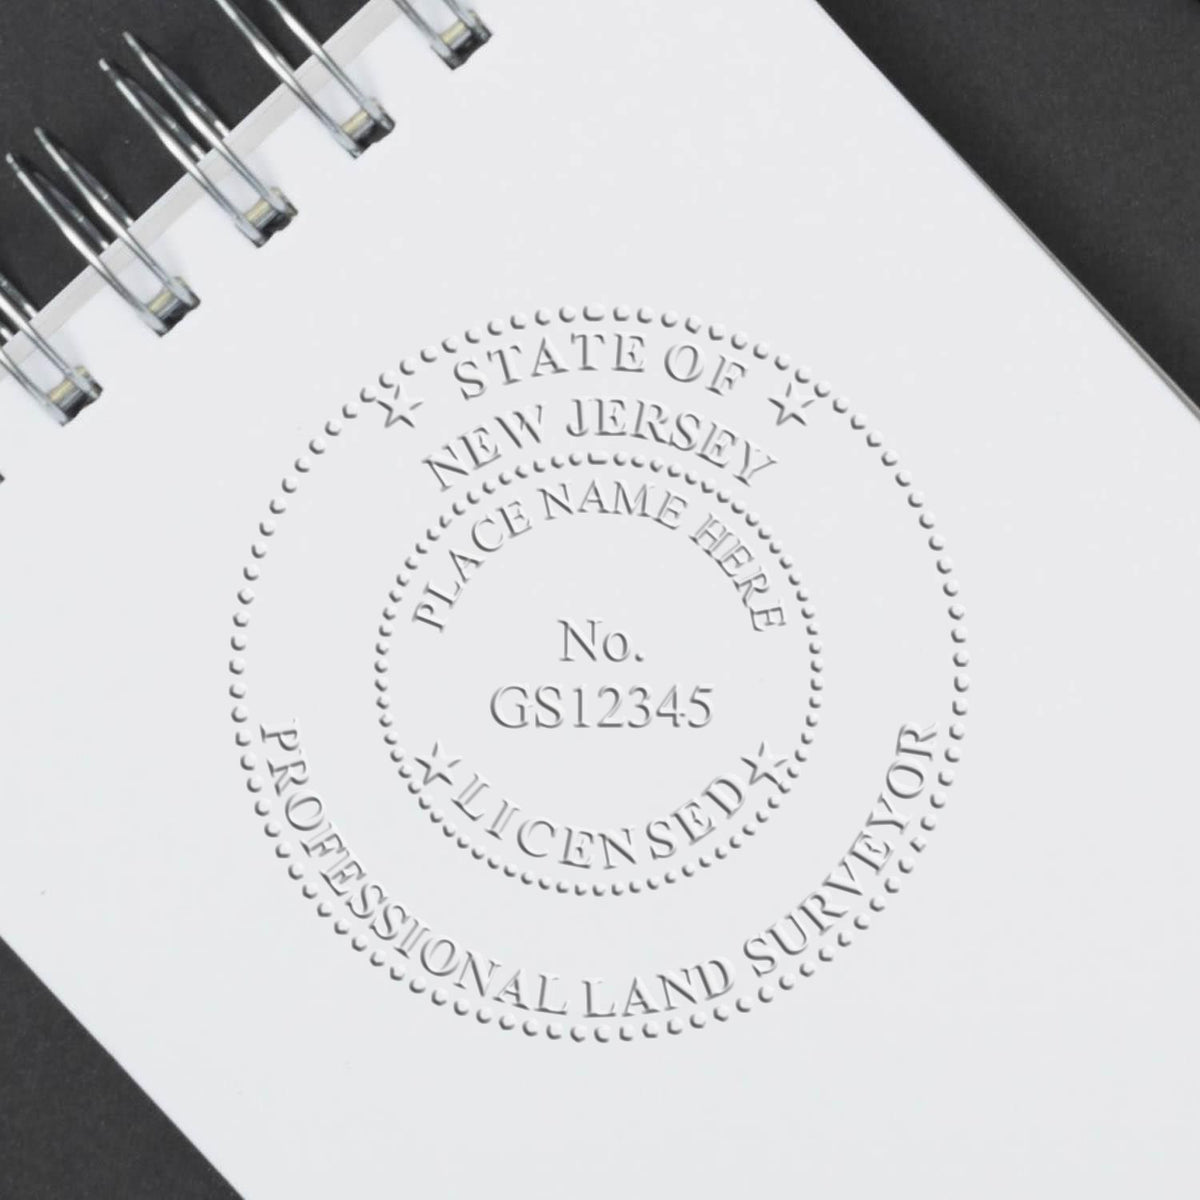 An in use photo of the Hybrid New Jersey Land Surveyor Seal showing a sample imprint on a cardstock